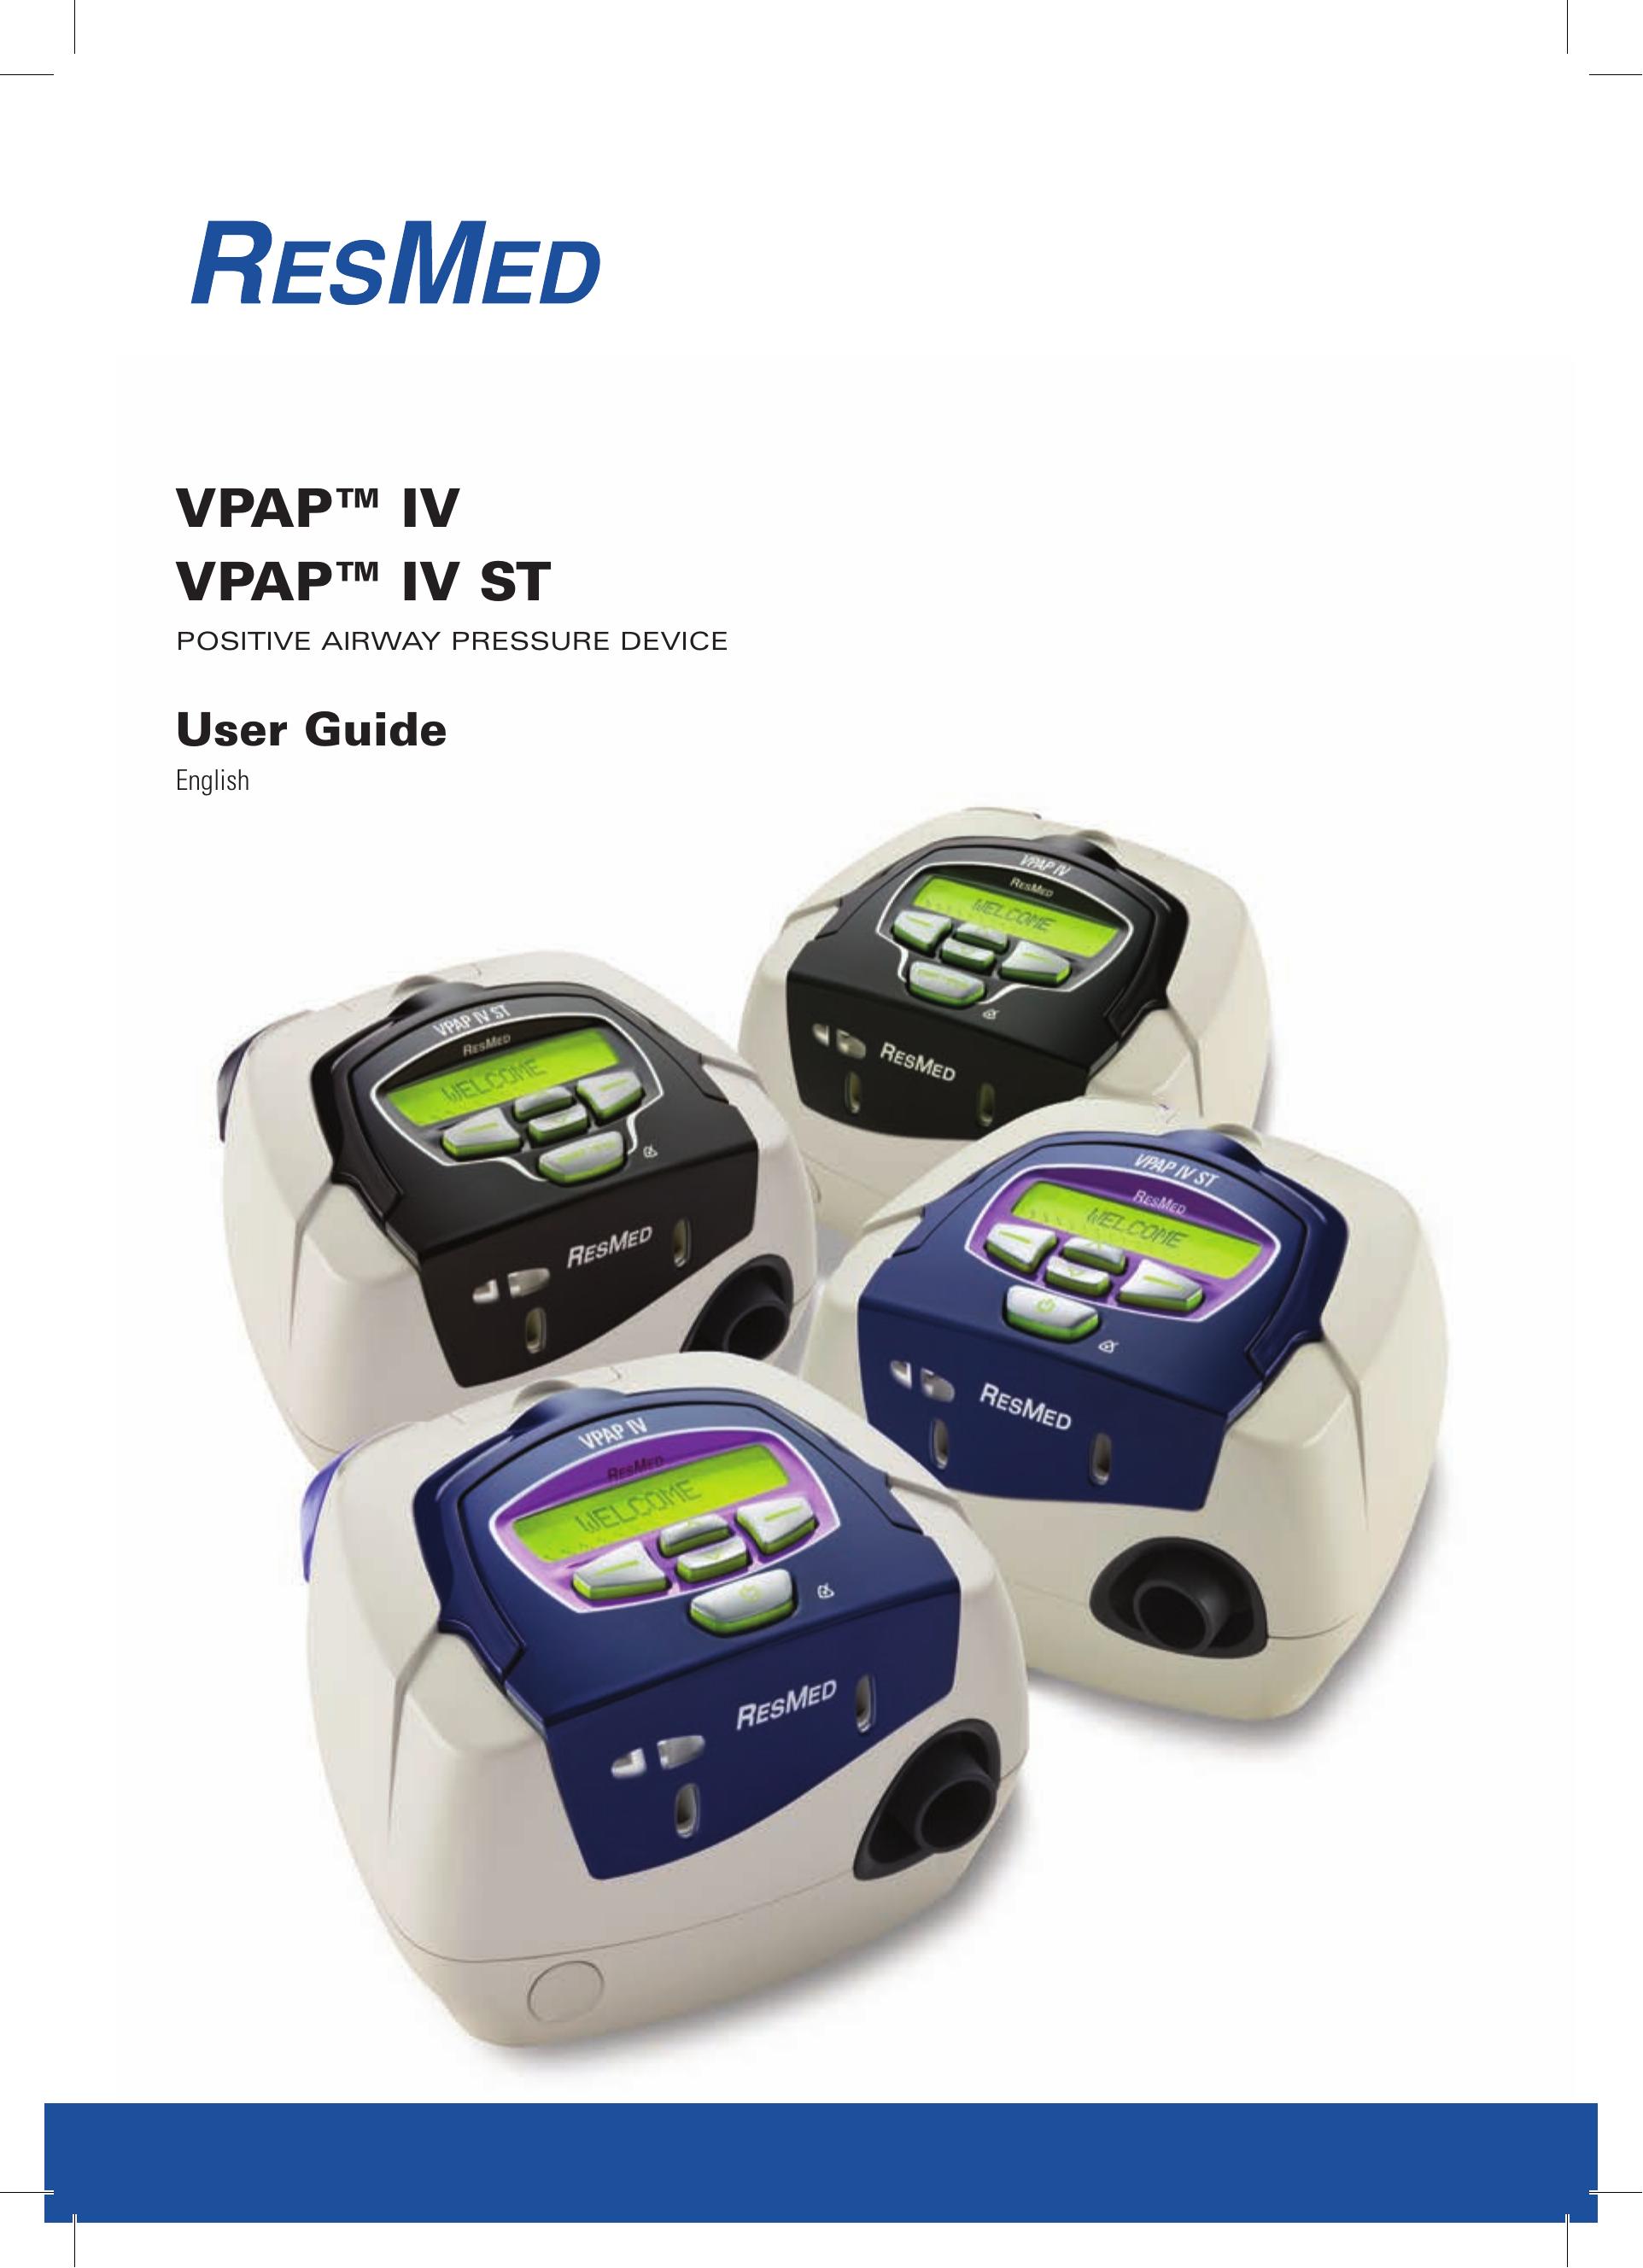 ResMed VPAP IV ST Respiratory Product User Manual